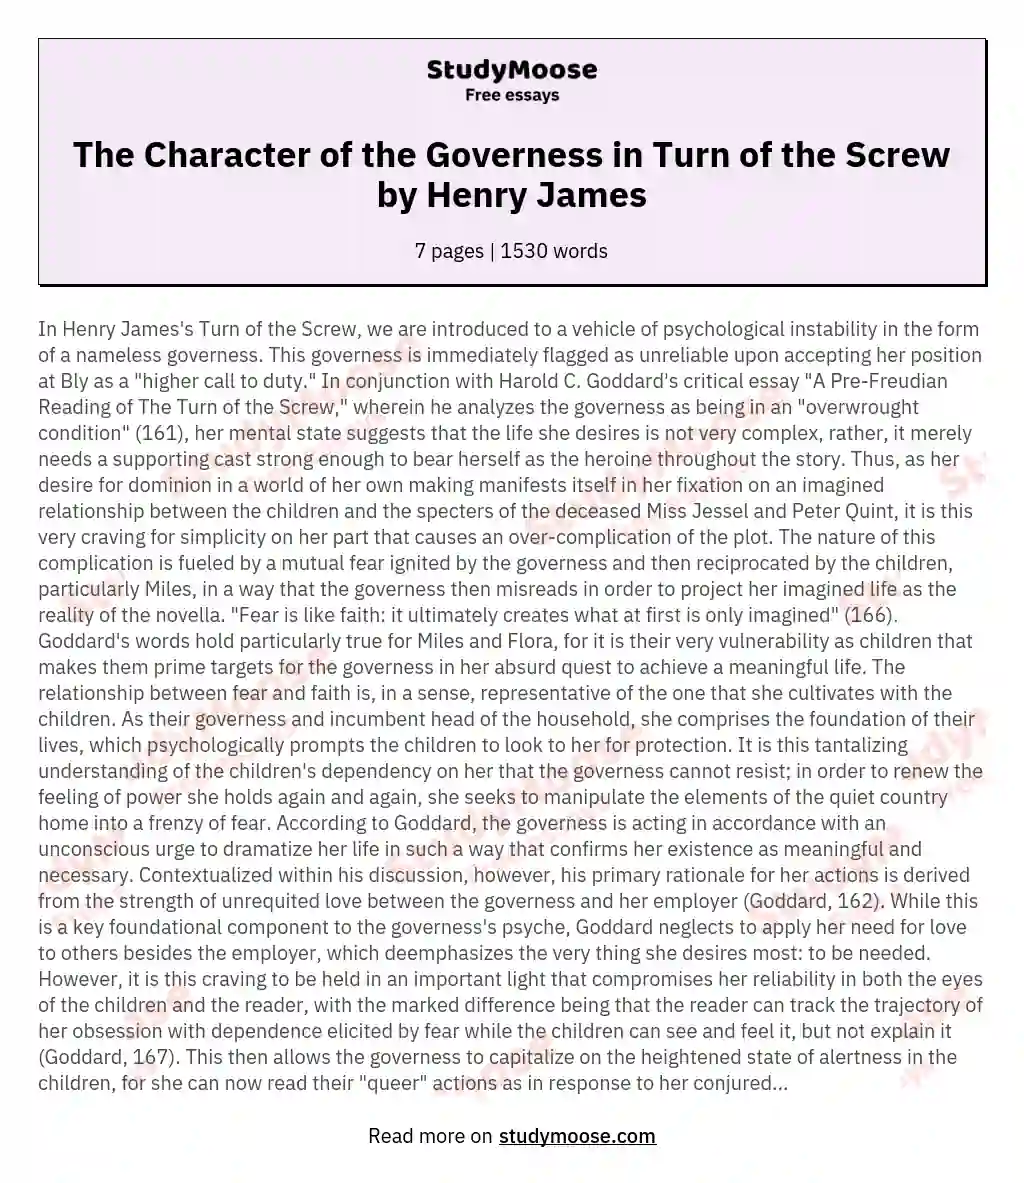 The Character of the Governess in Turn of the Screw by Henry James essay